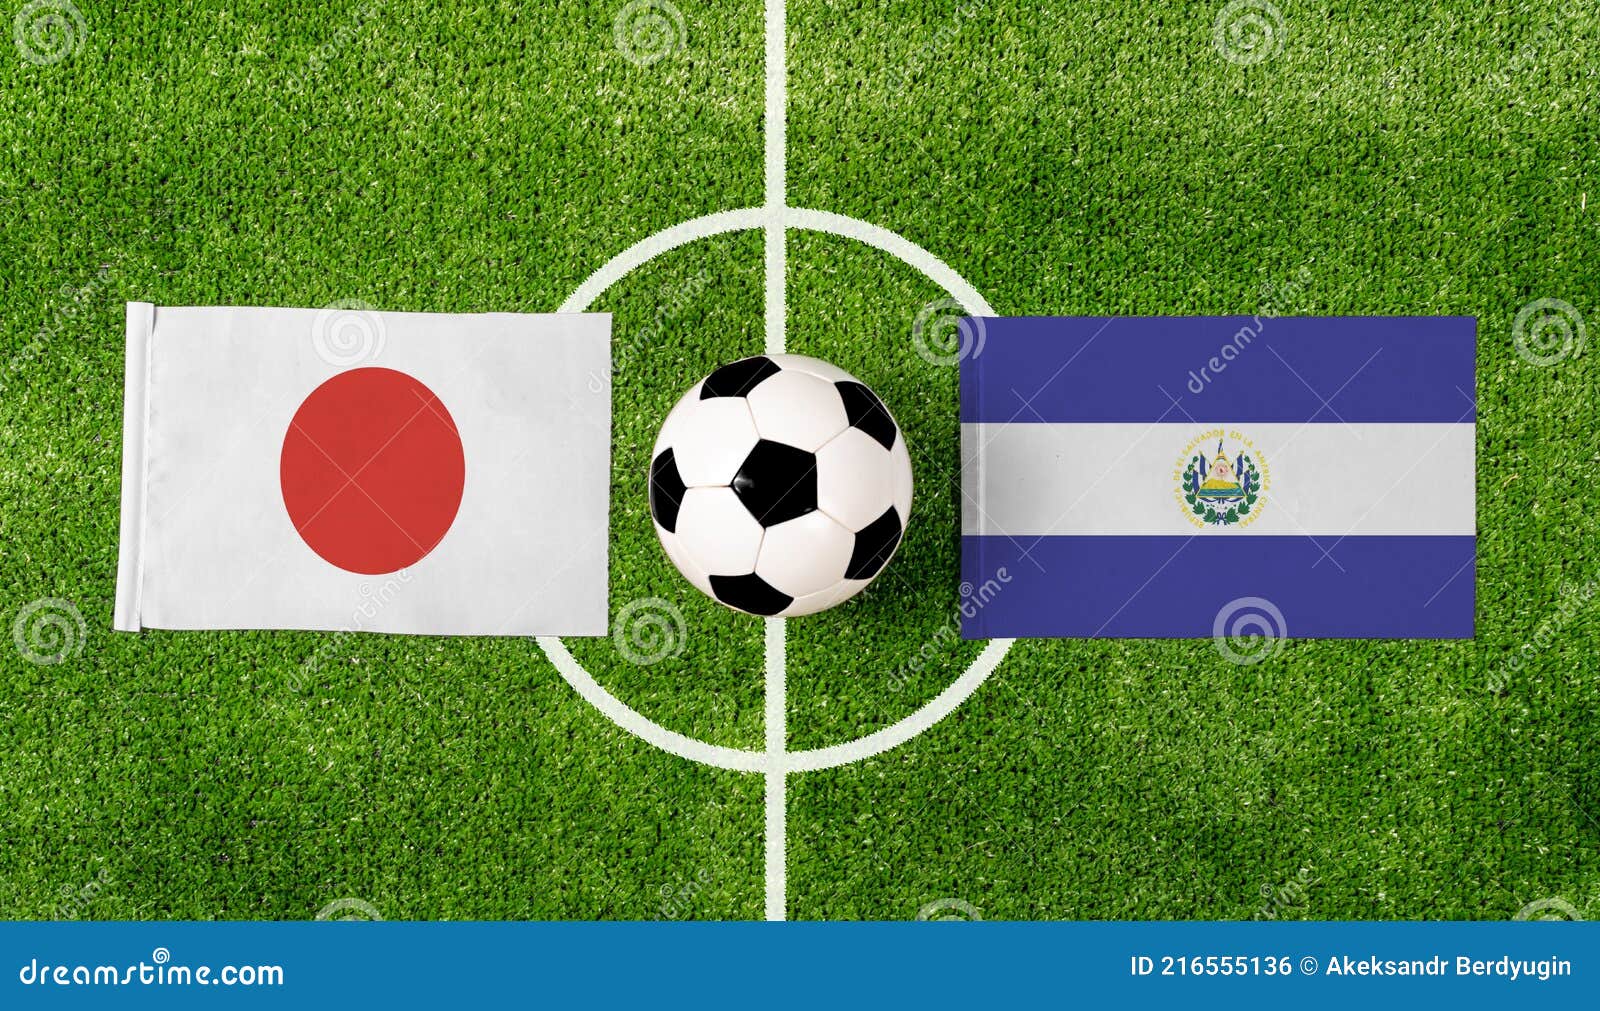 Top View Ball with Japan Vs. El Salvador Flags Match on Green Football